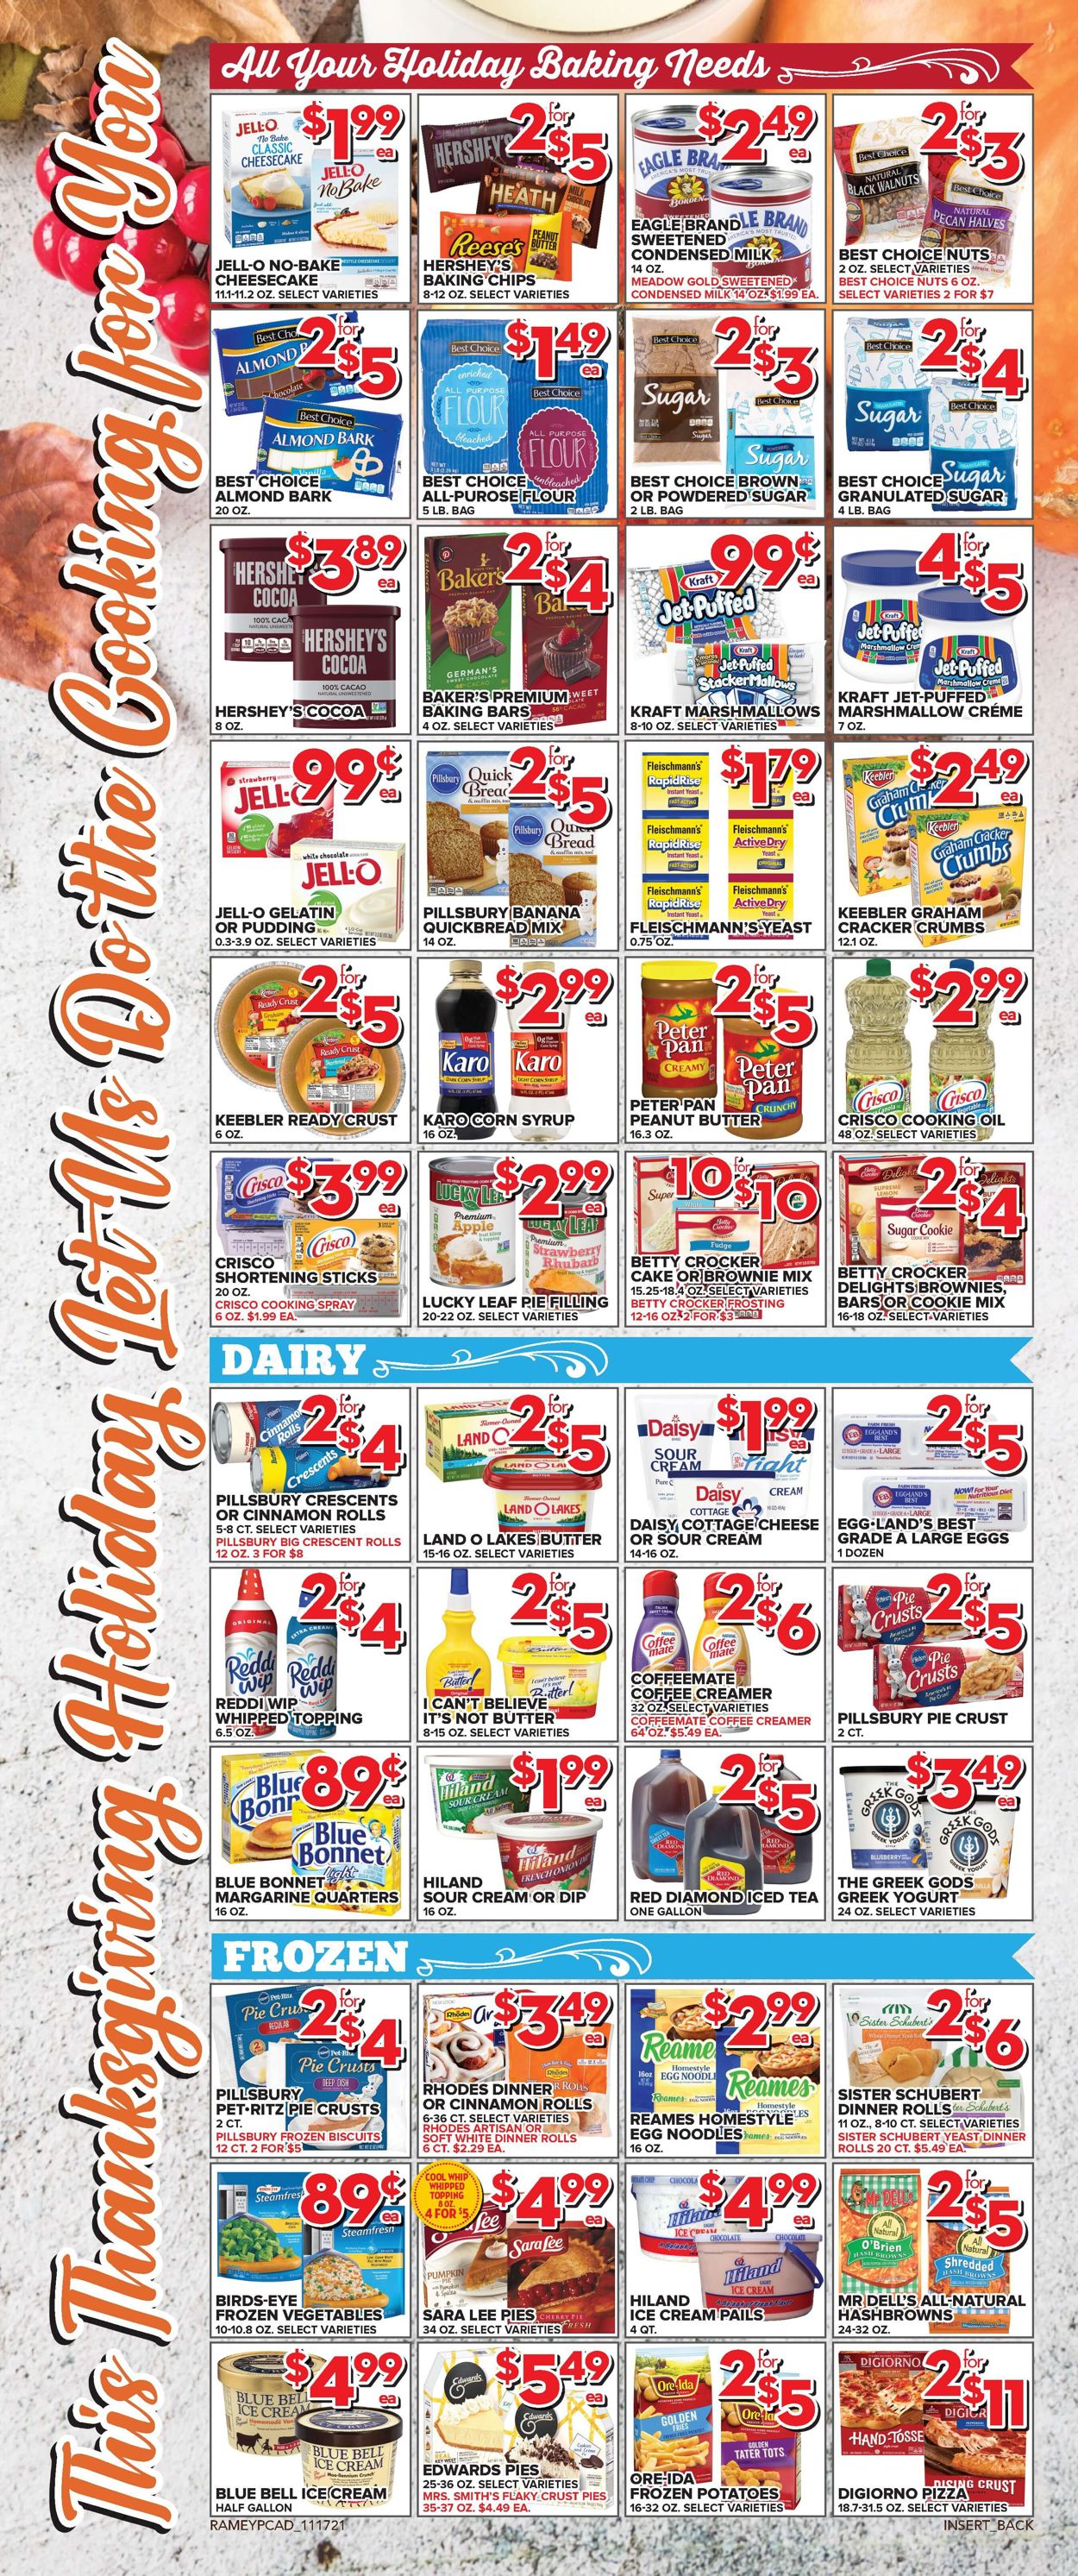 Price Cutter THANKSGIVING 2021 Weekly Ad Circular - valid 11/17-11/25/2021 (Page 6)